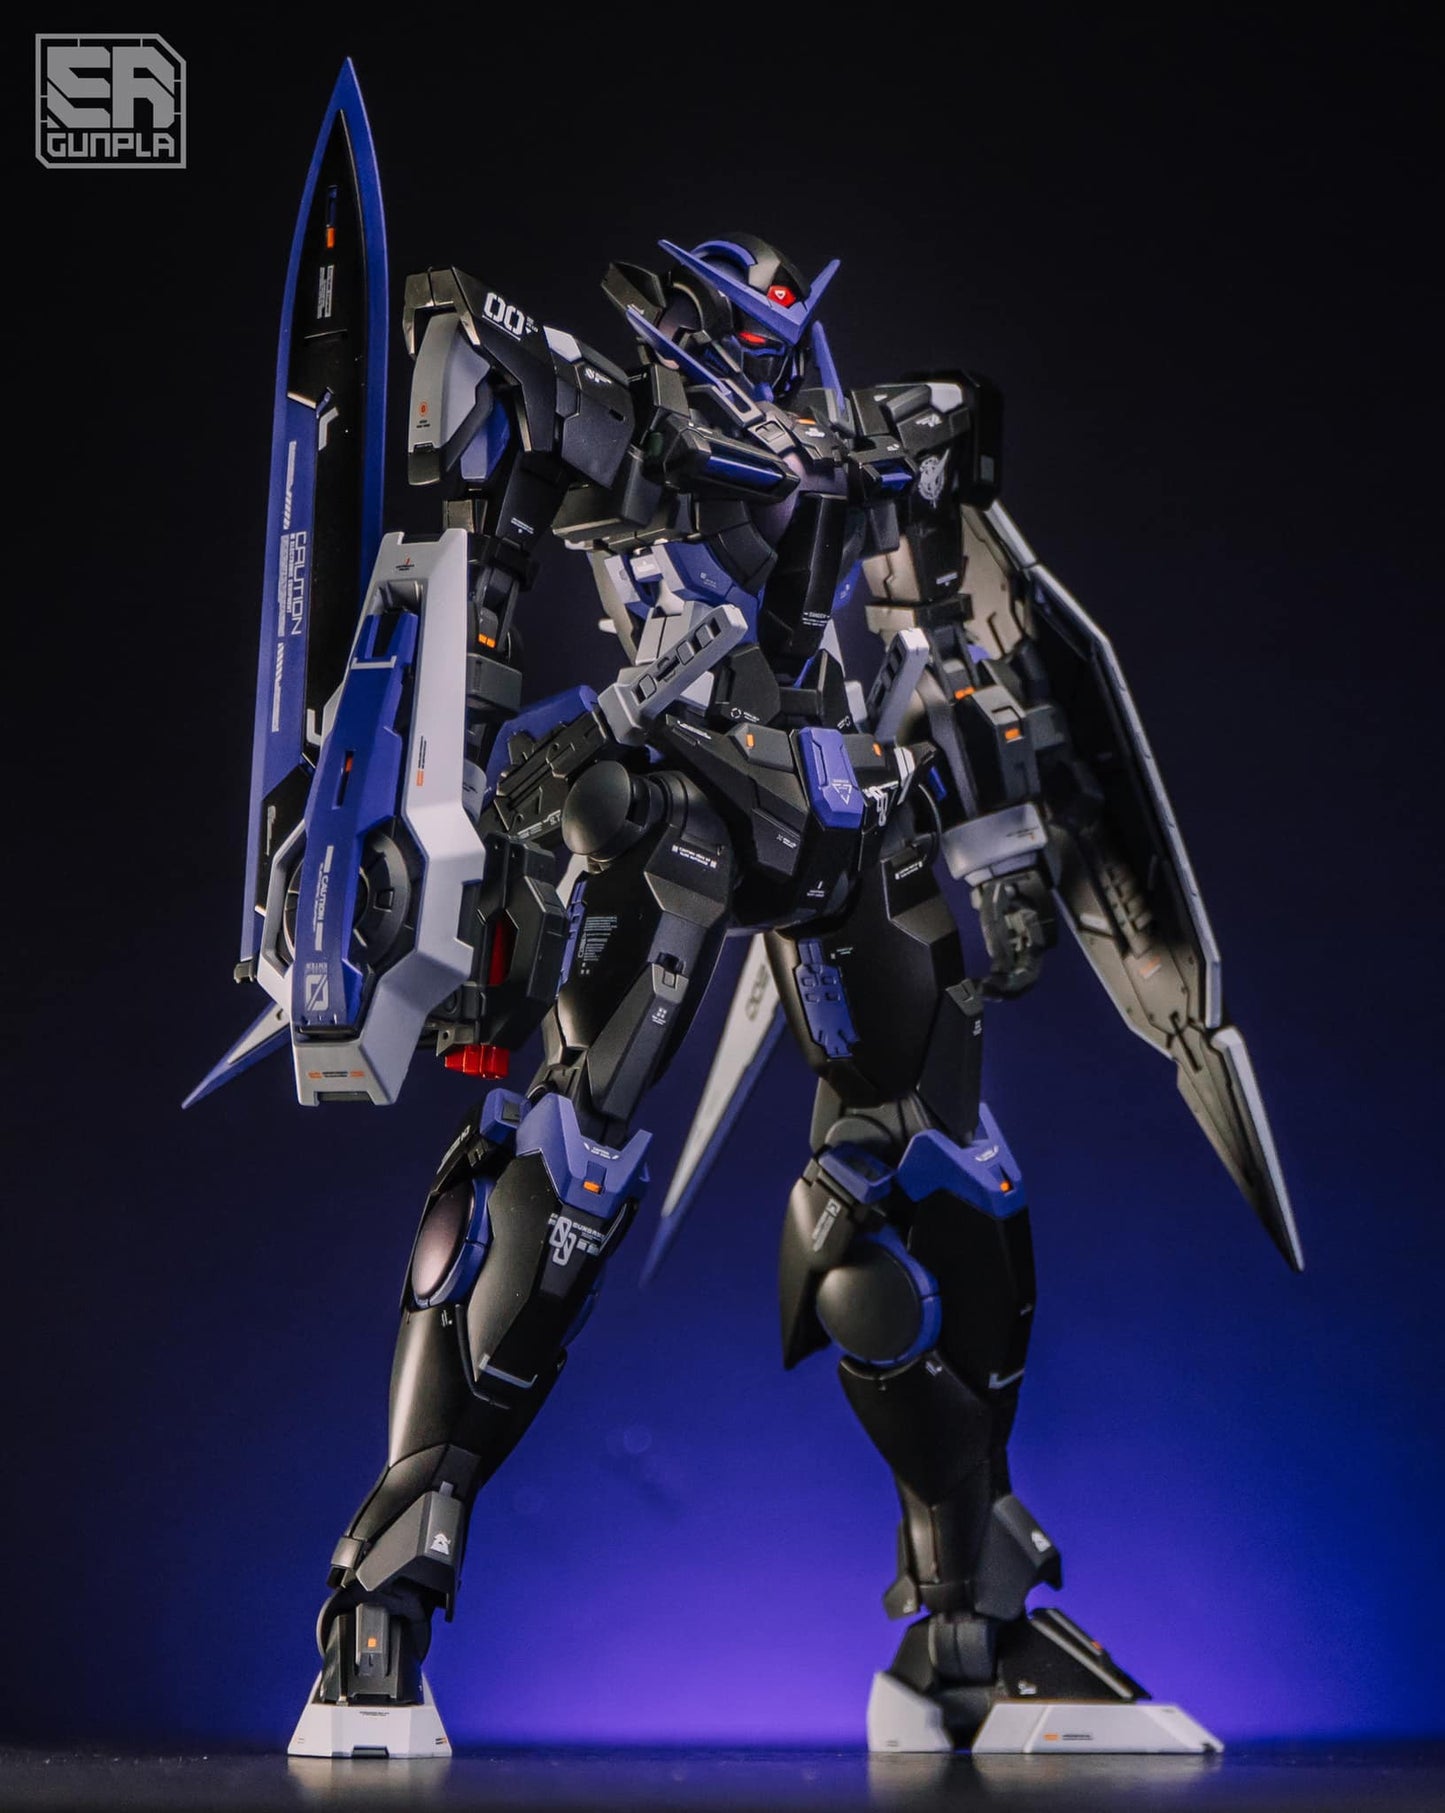 AT Color EA Series (Gunpla pre-thinned airbrush color)